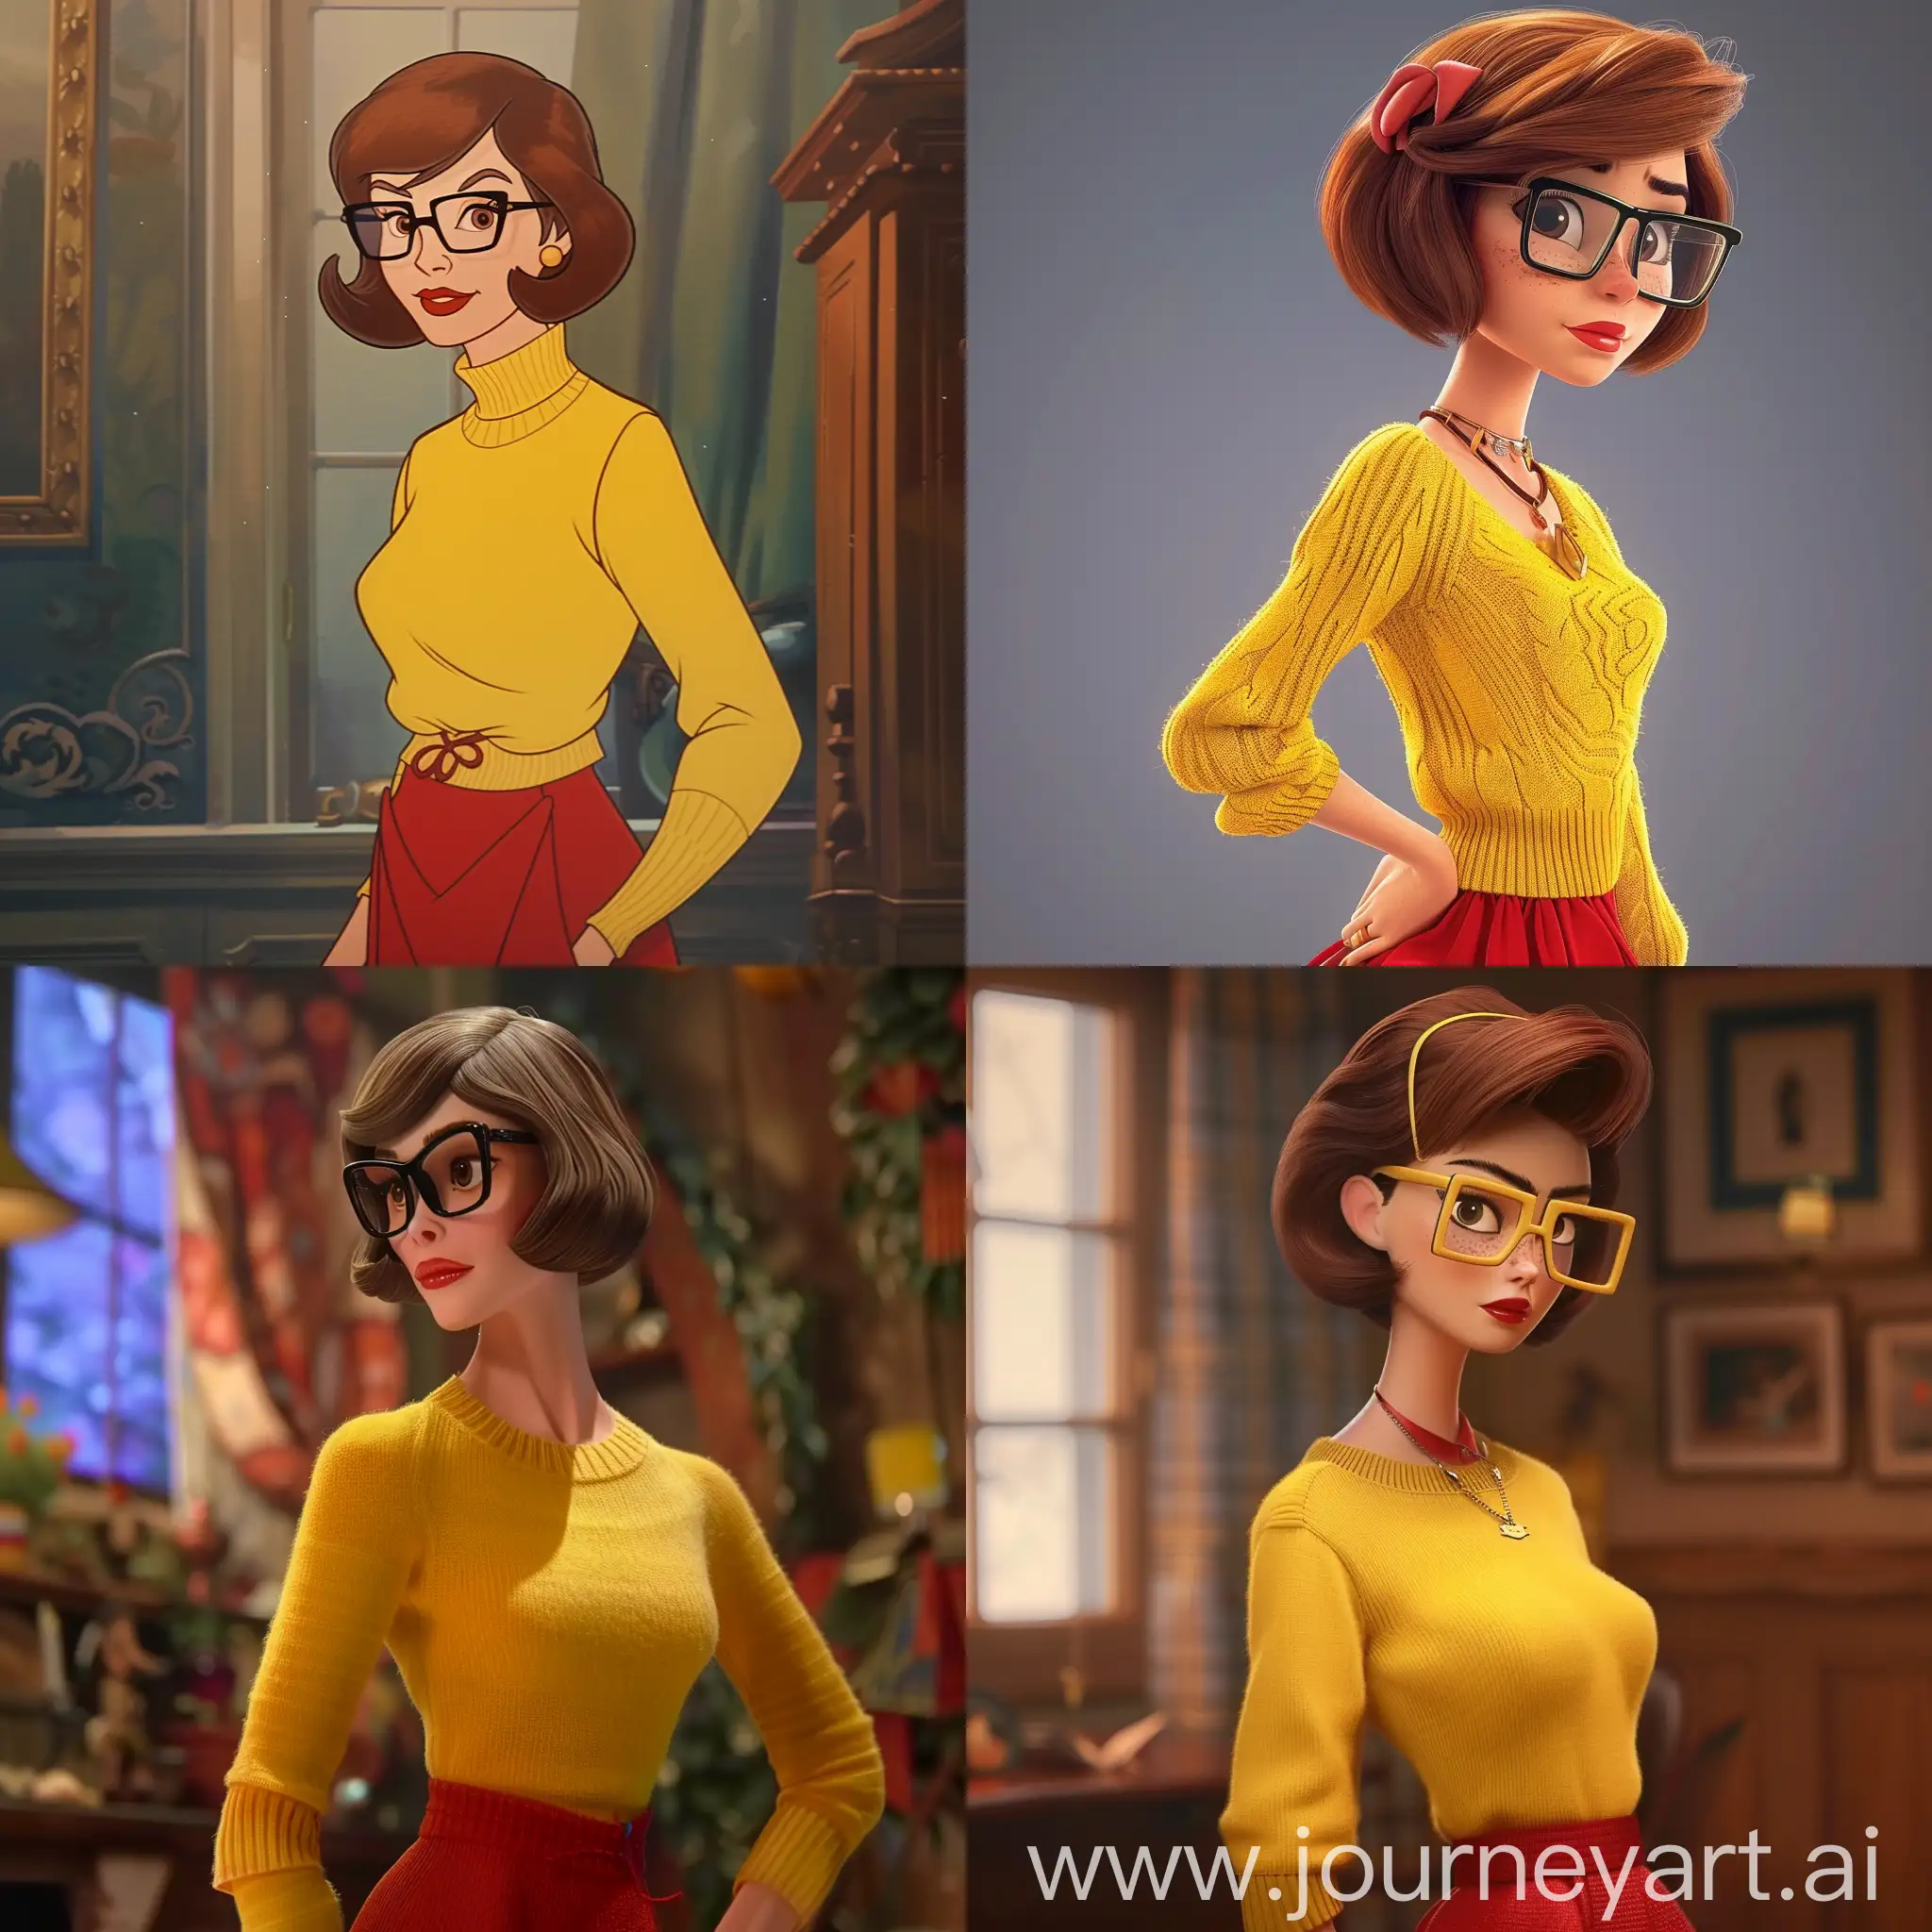 a woman with short brown hair wearing square glasses, a yellow sweater and a red skirt (Velma dinkley) in Disney animation cartoon